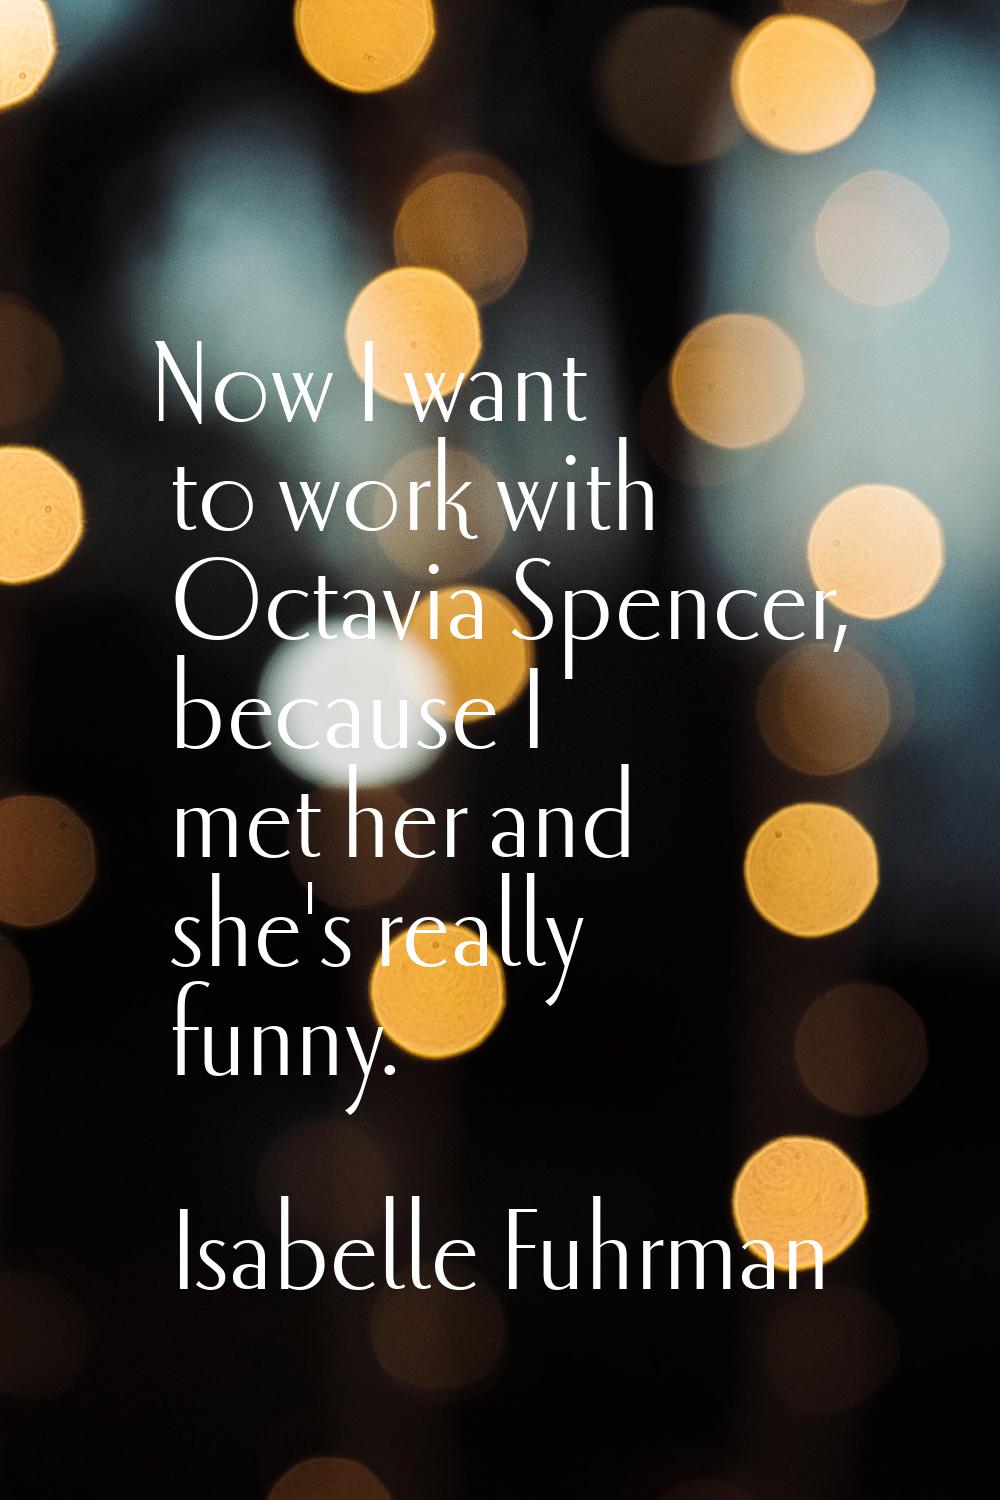 Now I want to work with Octavia Spencer, because I met her and she's really funny.